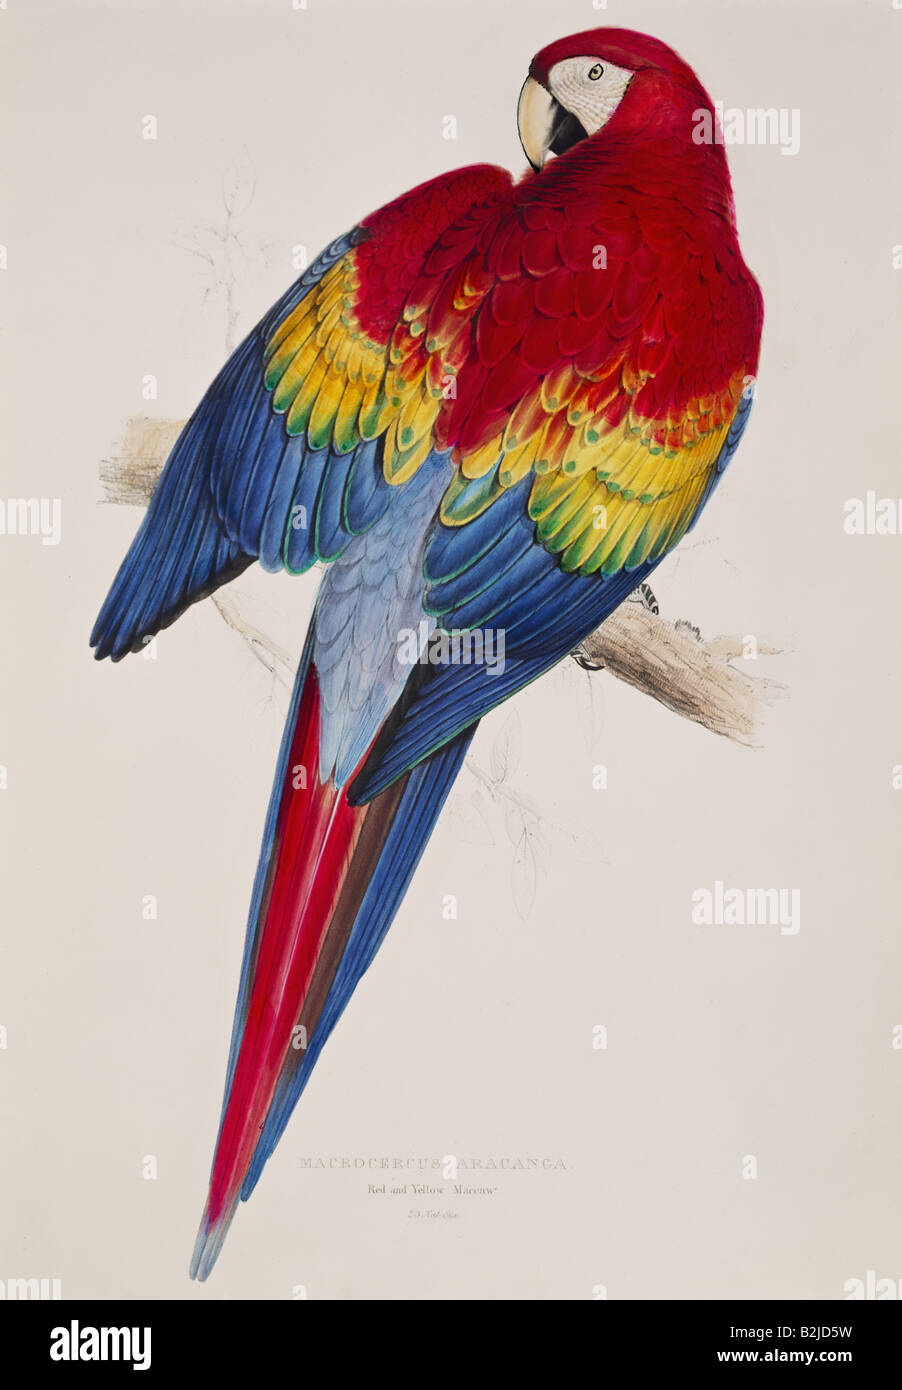 zoology, avian / bird, Scarlet Macaw (Ara macao), lithograph by Edward Lear, 'Illustrations of the Family of Psittacidae', London, 1831 - 1833, private collection, , Stock Photo